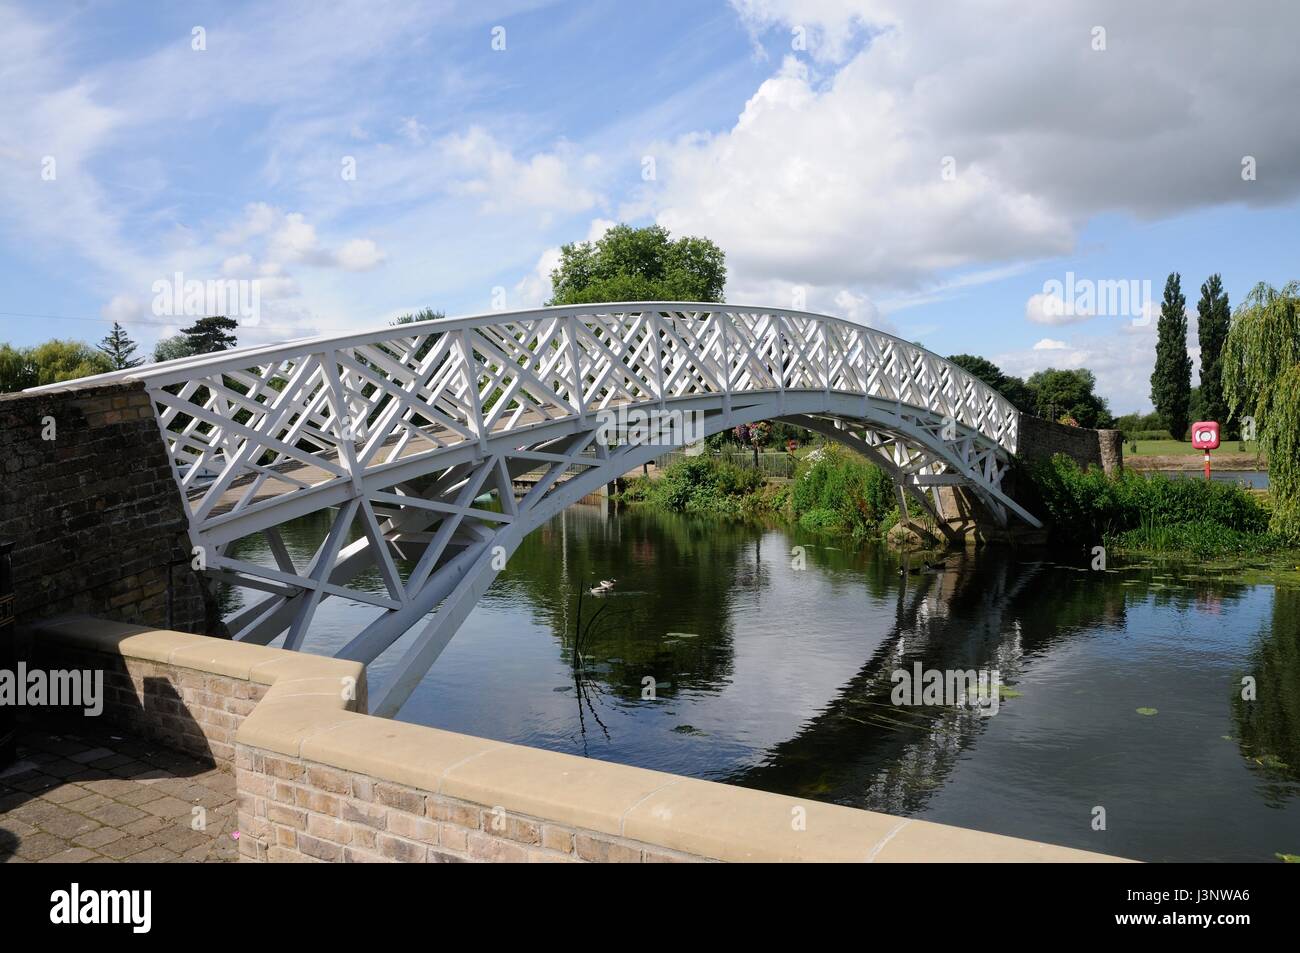 Chinese Bridge, Godmanchester, Cambridgeshire, Bridge was originally erected in 1827.  Designed by James Gallier it has been rebuilt at least twice, a Stock Photo